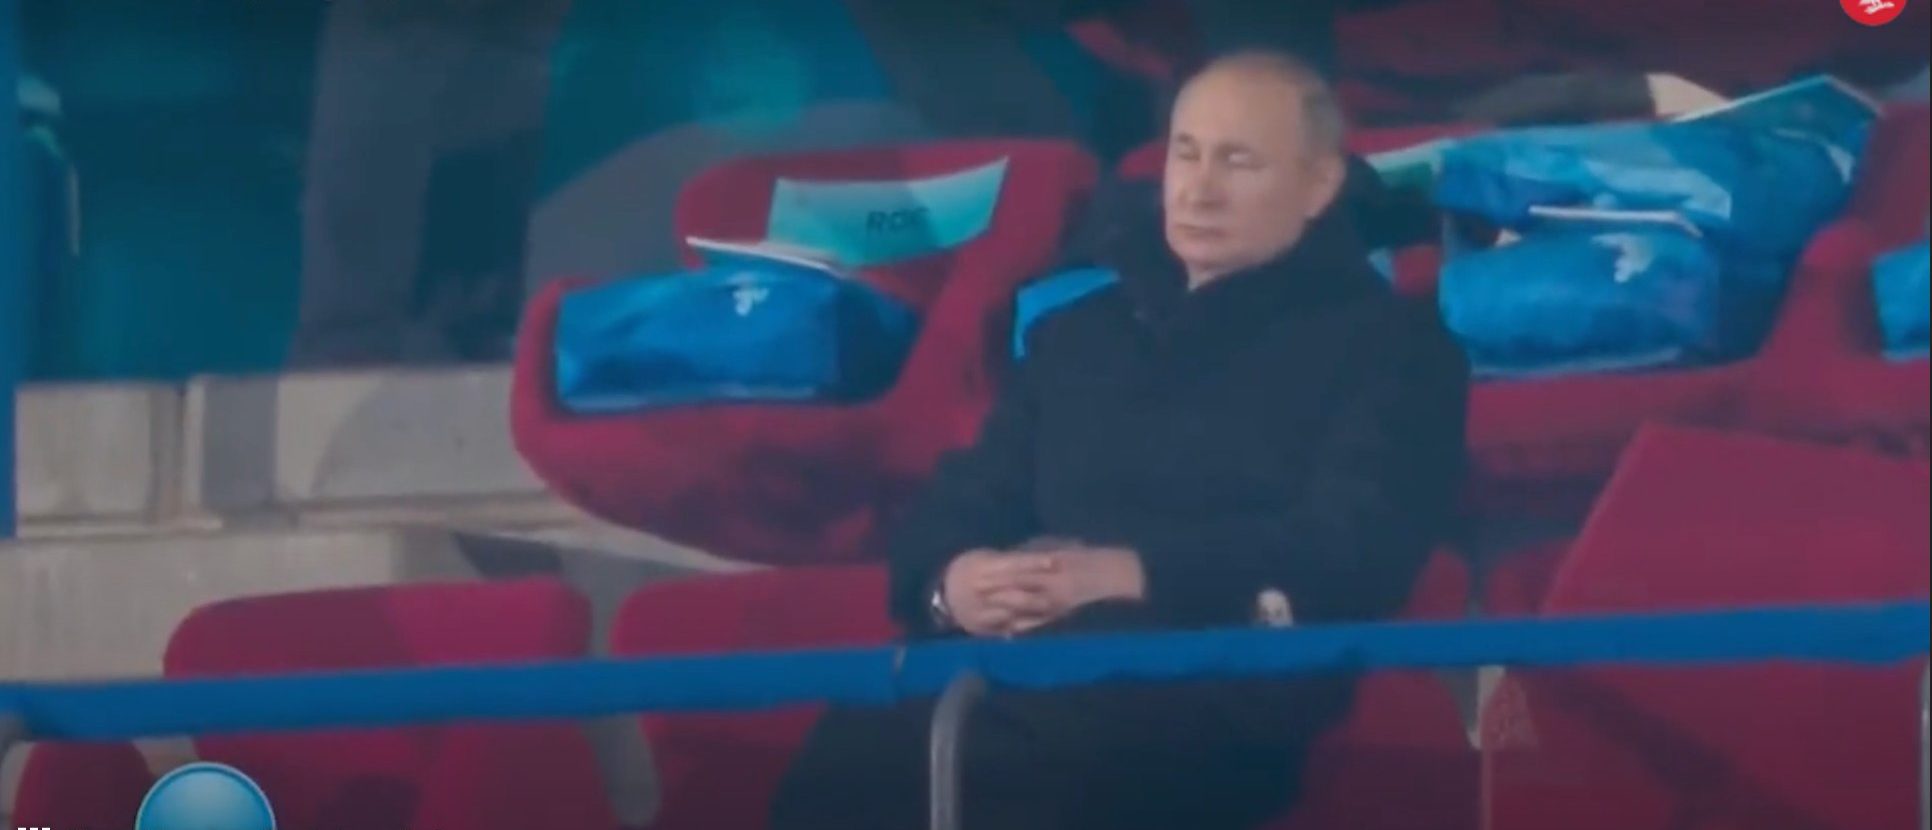 Putin Appears To Fall Asleep While Ukrainian Team Is Introduced At Olympics The Daily Caller